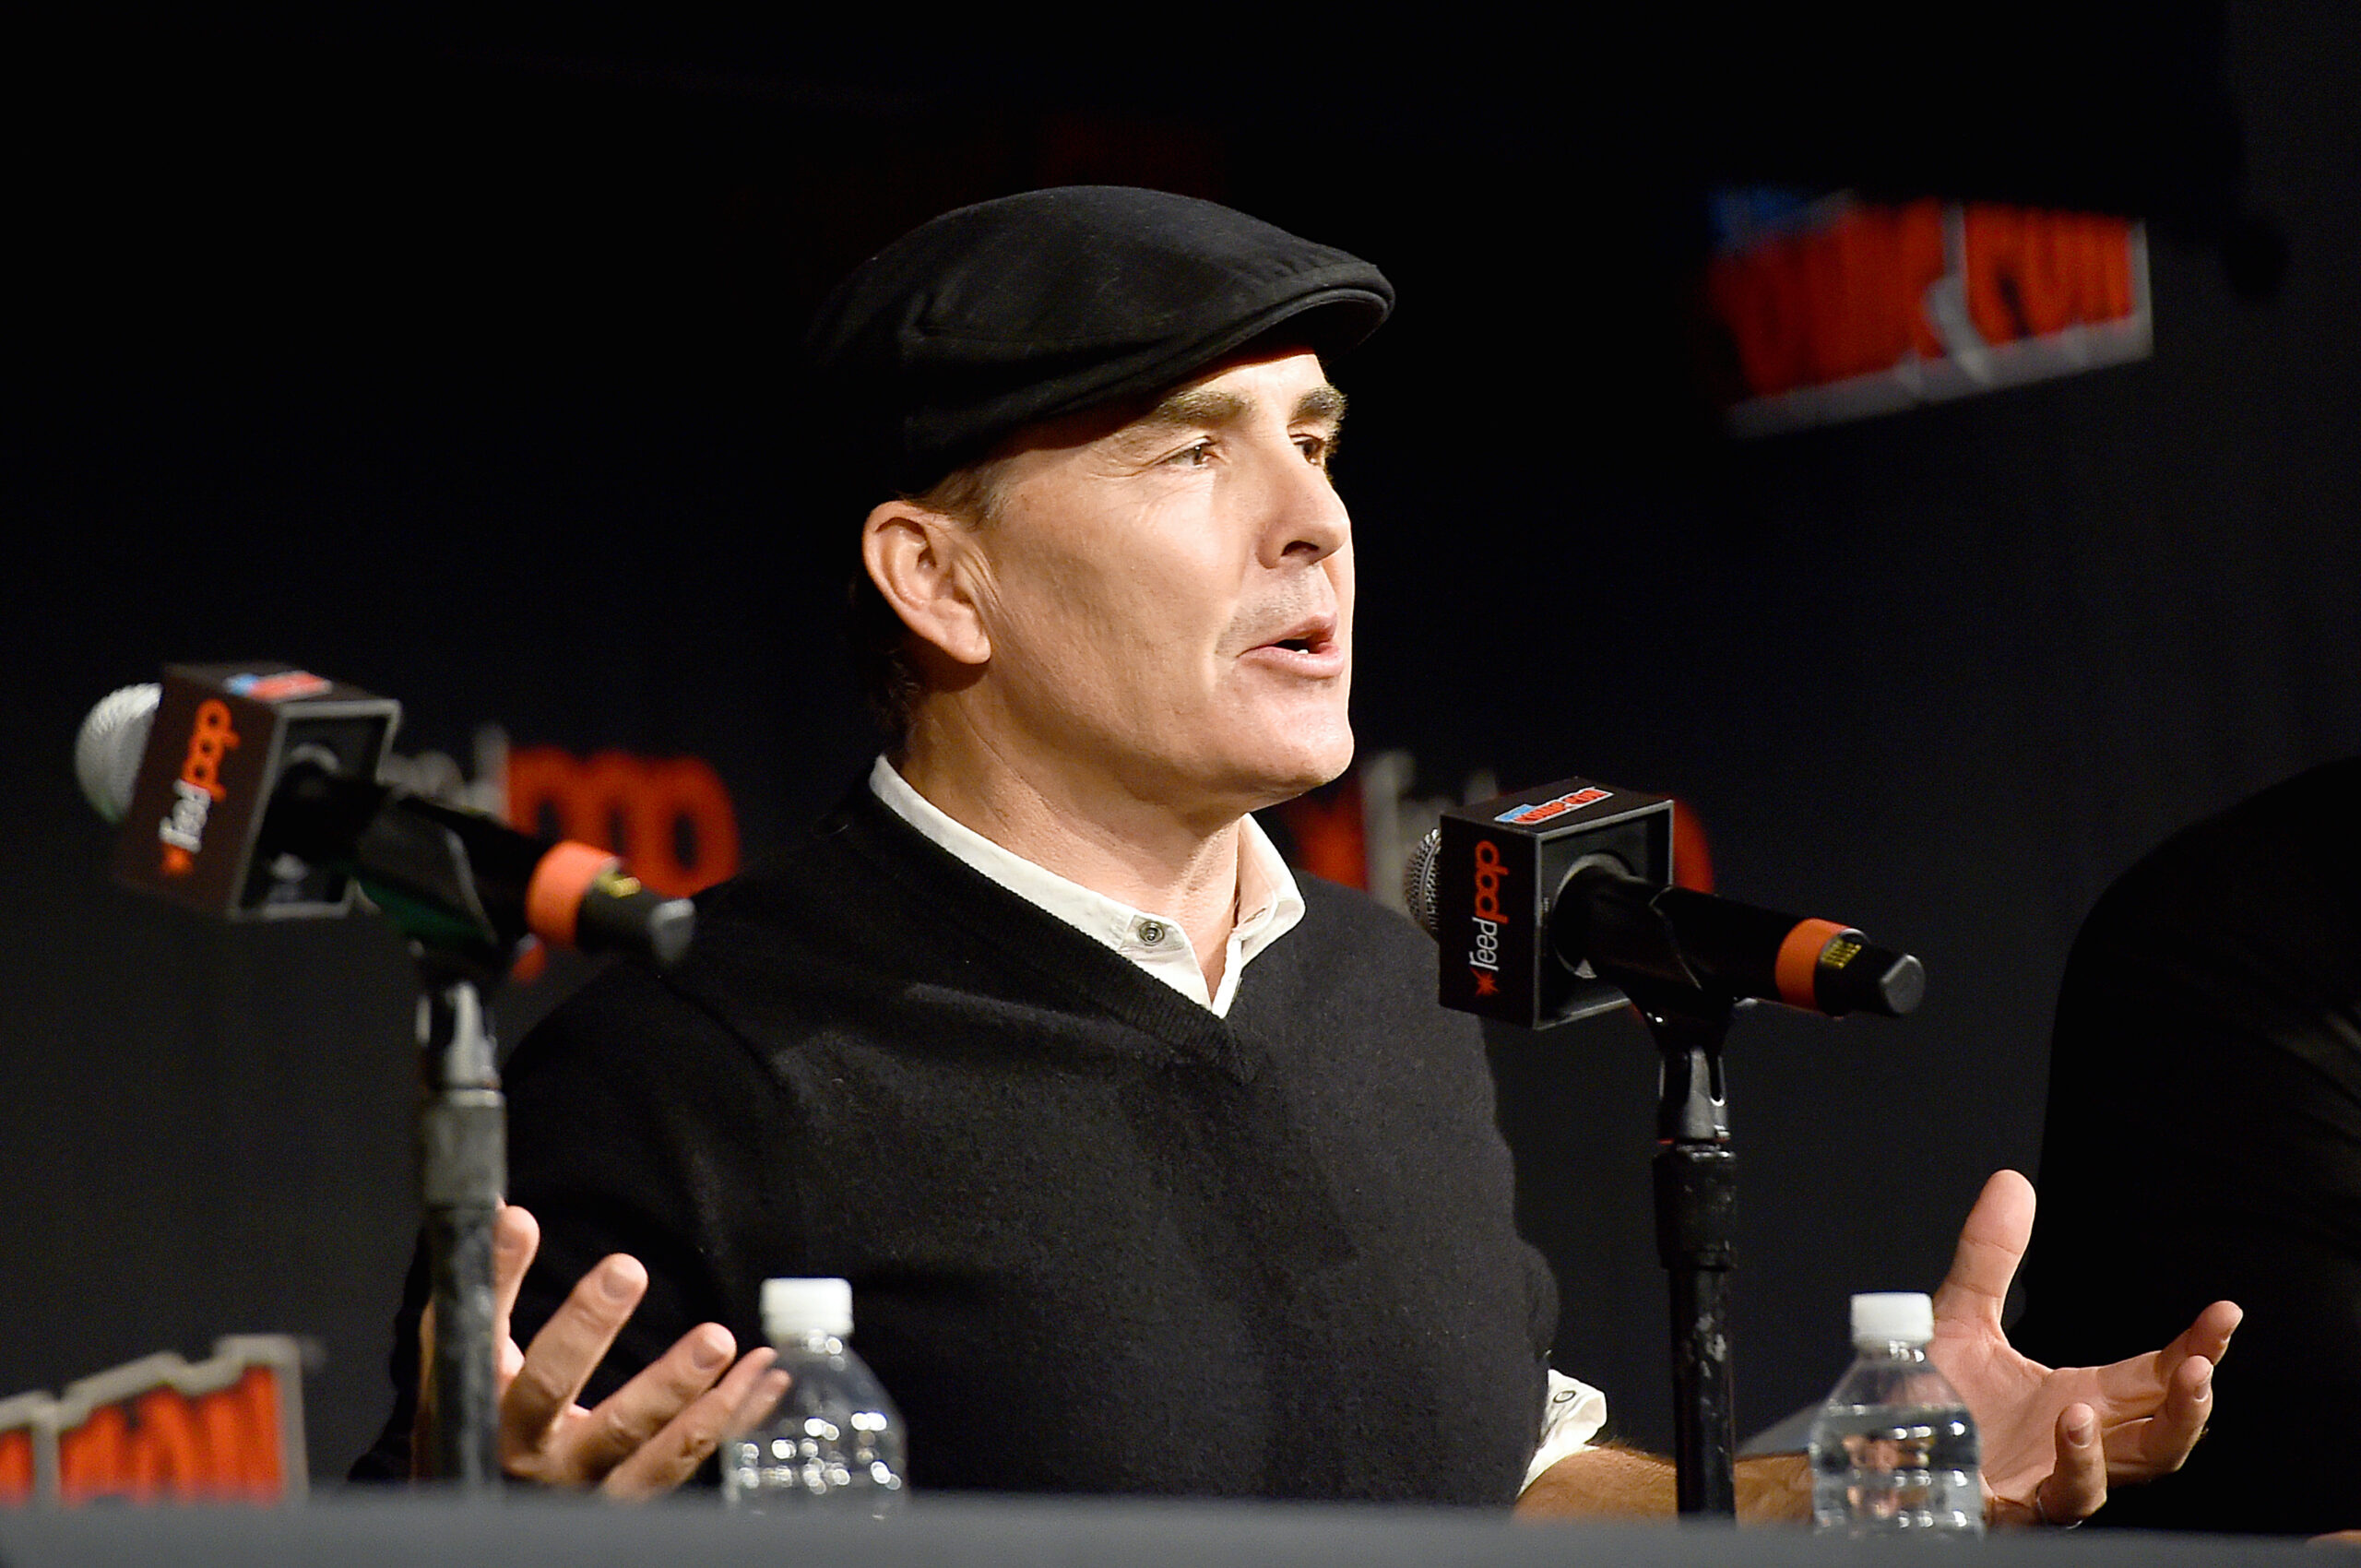 Nolan North (a white man in his late forties) wearing a flat cap and talking on a panel